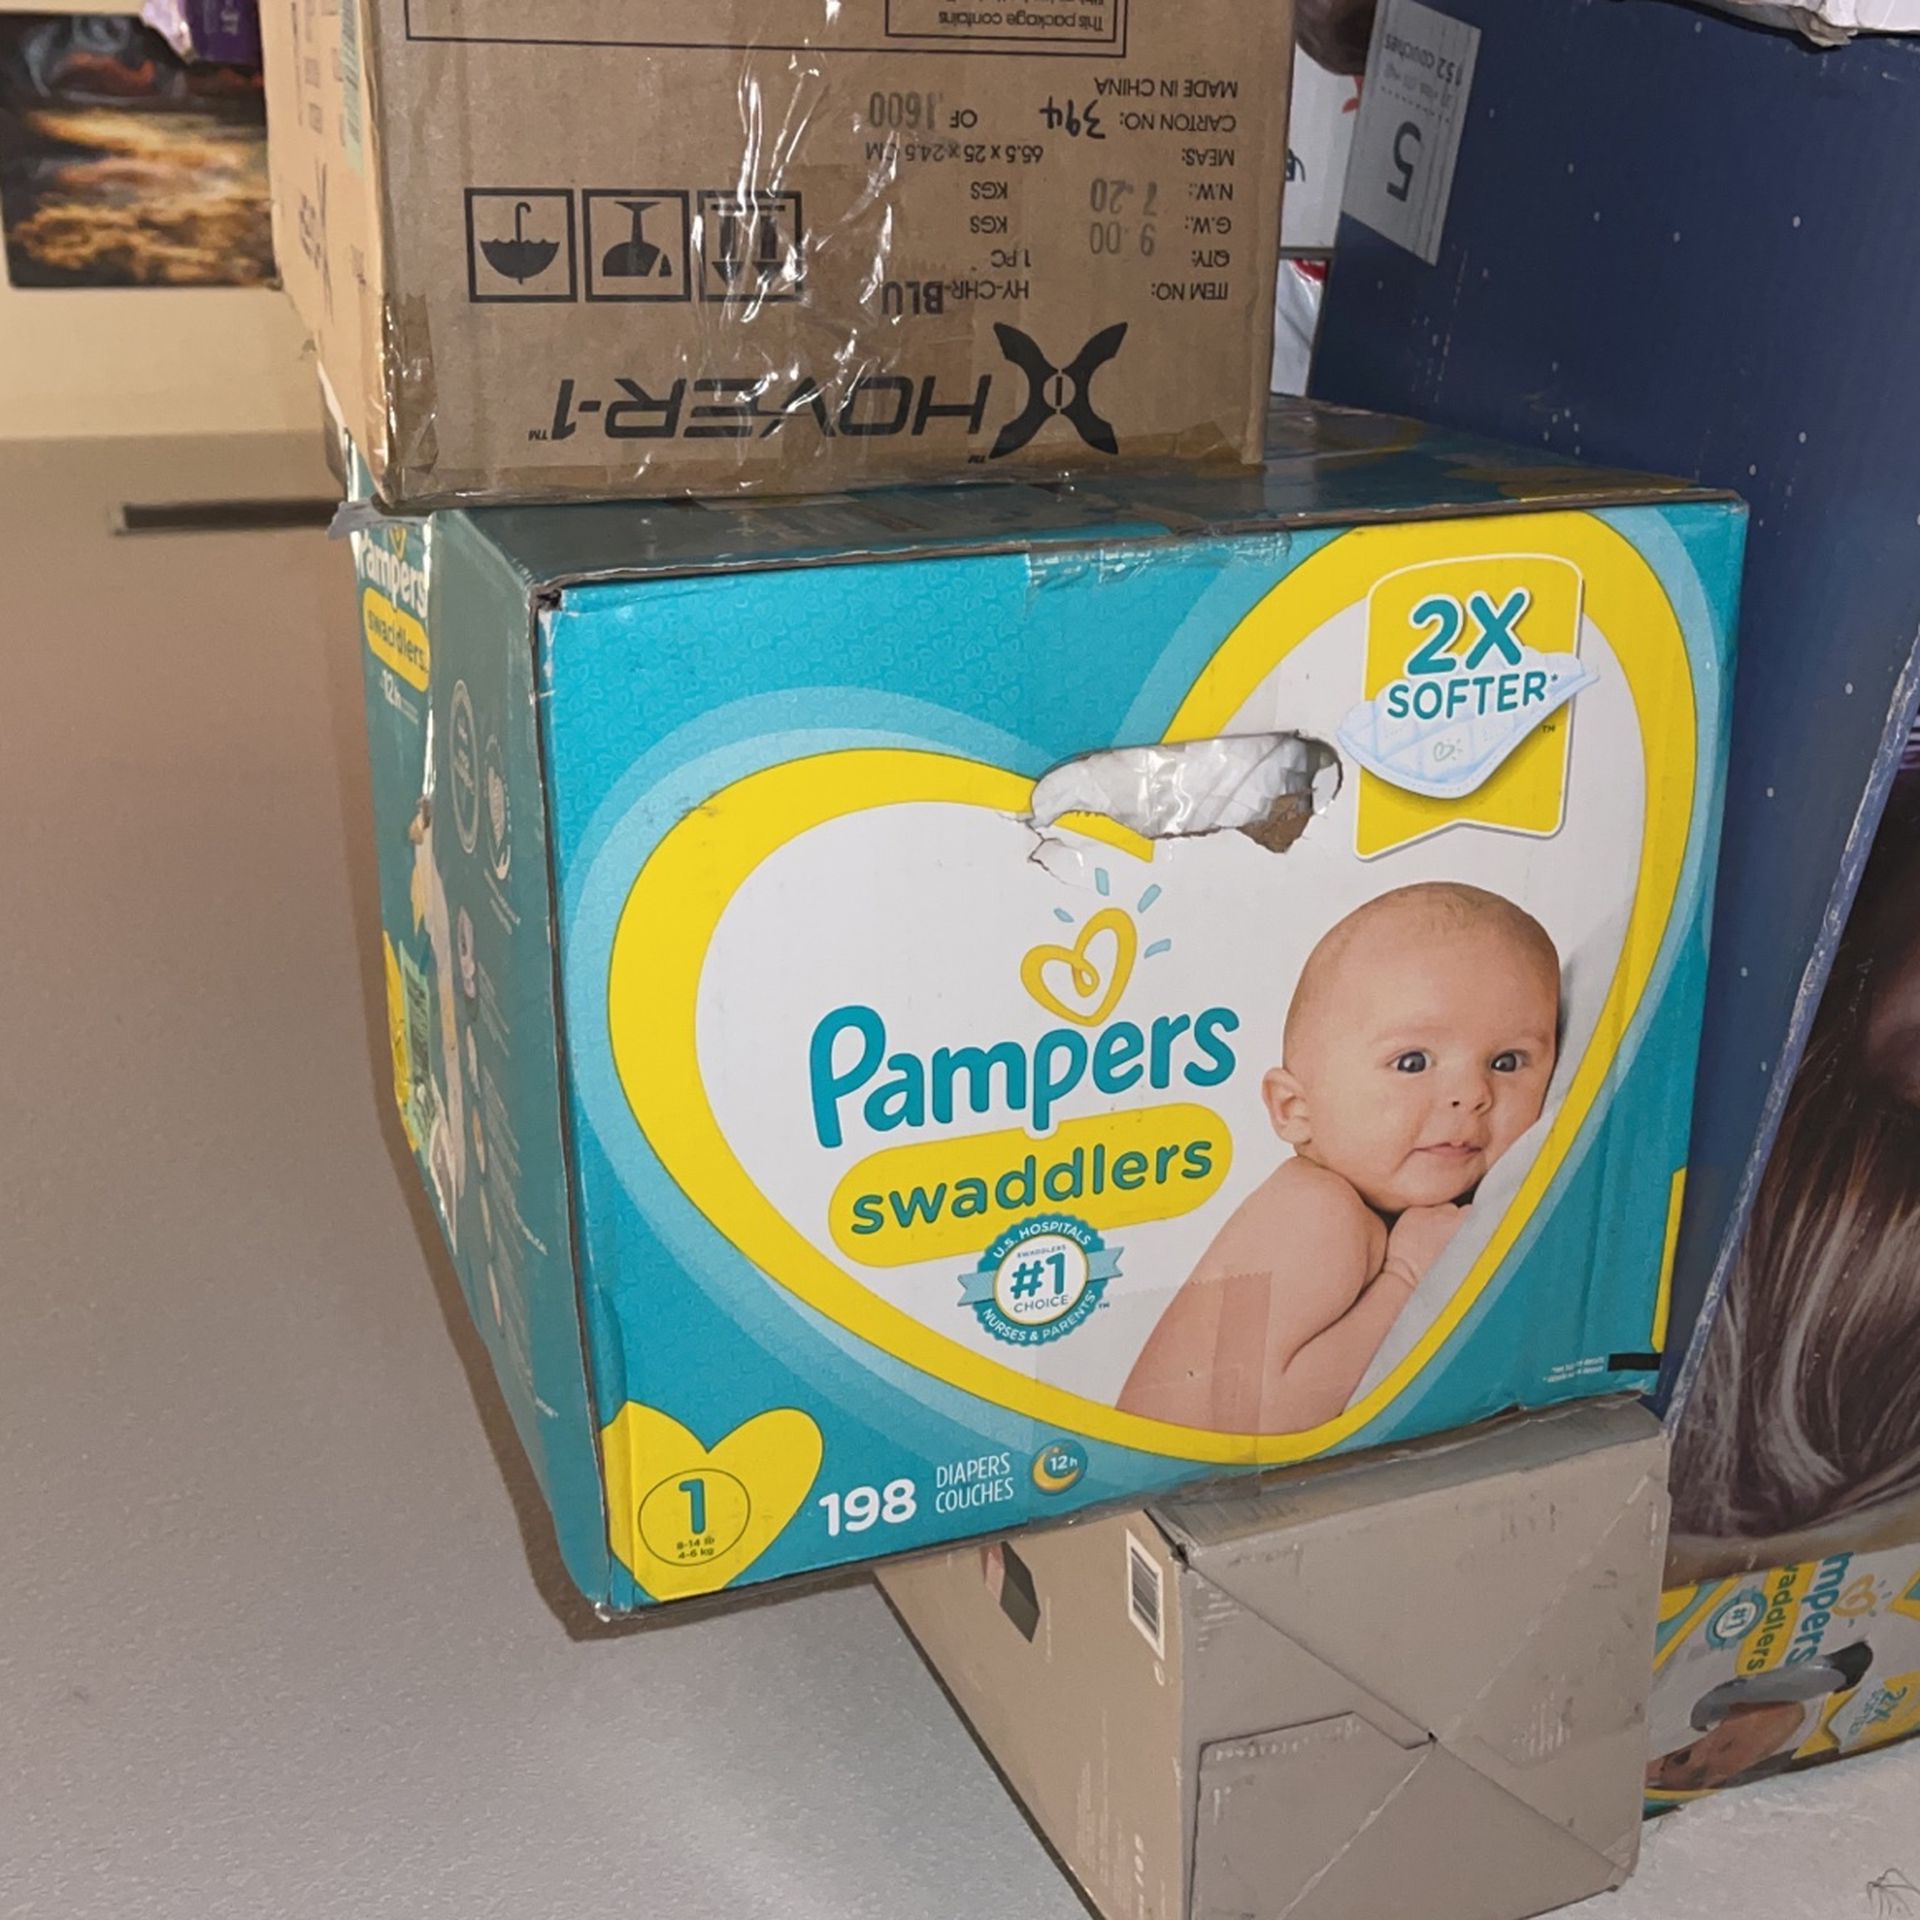 PAMPERS SWADDLERS 198 Count SIZE 1